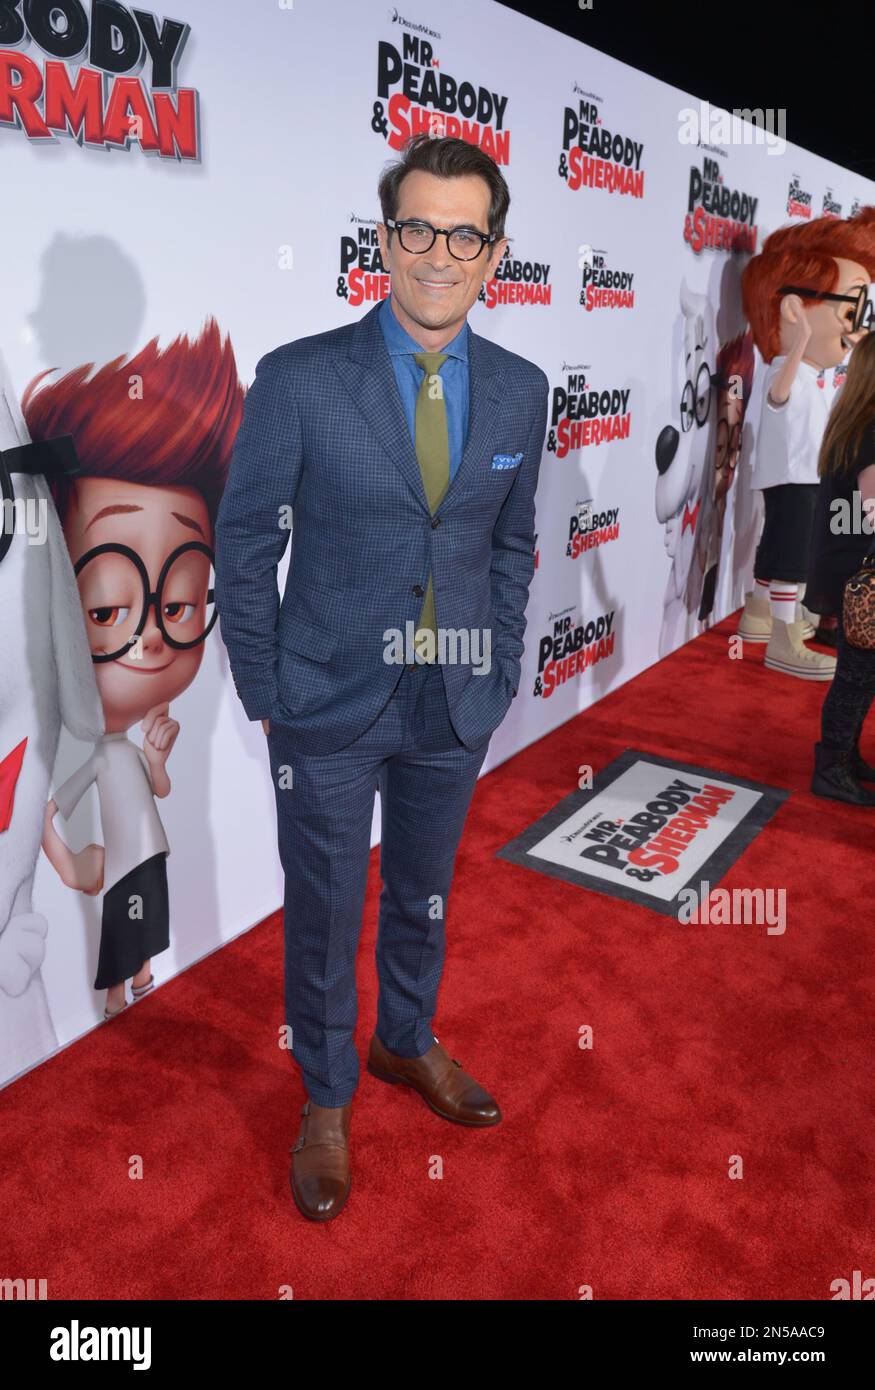 Cast member Ty Burrell, the voice of Mr. Peabody in the animated motion  picture Mr. Peabody & Sherman attends the premiere of the film at the  Regency Village Theatre in the Westwood section of Los Angeles March 5,  2014. Storyline: Mr. Peabody, the